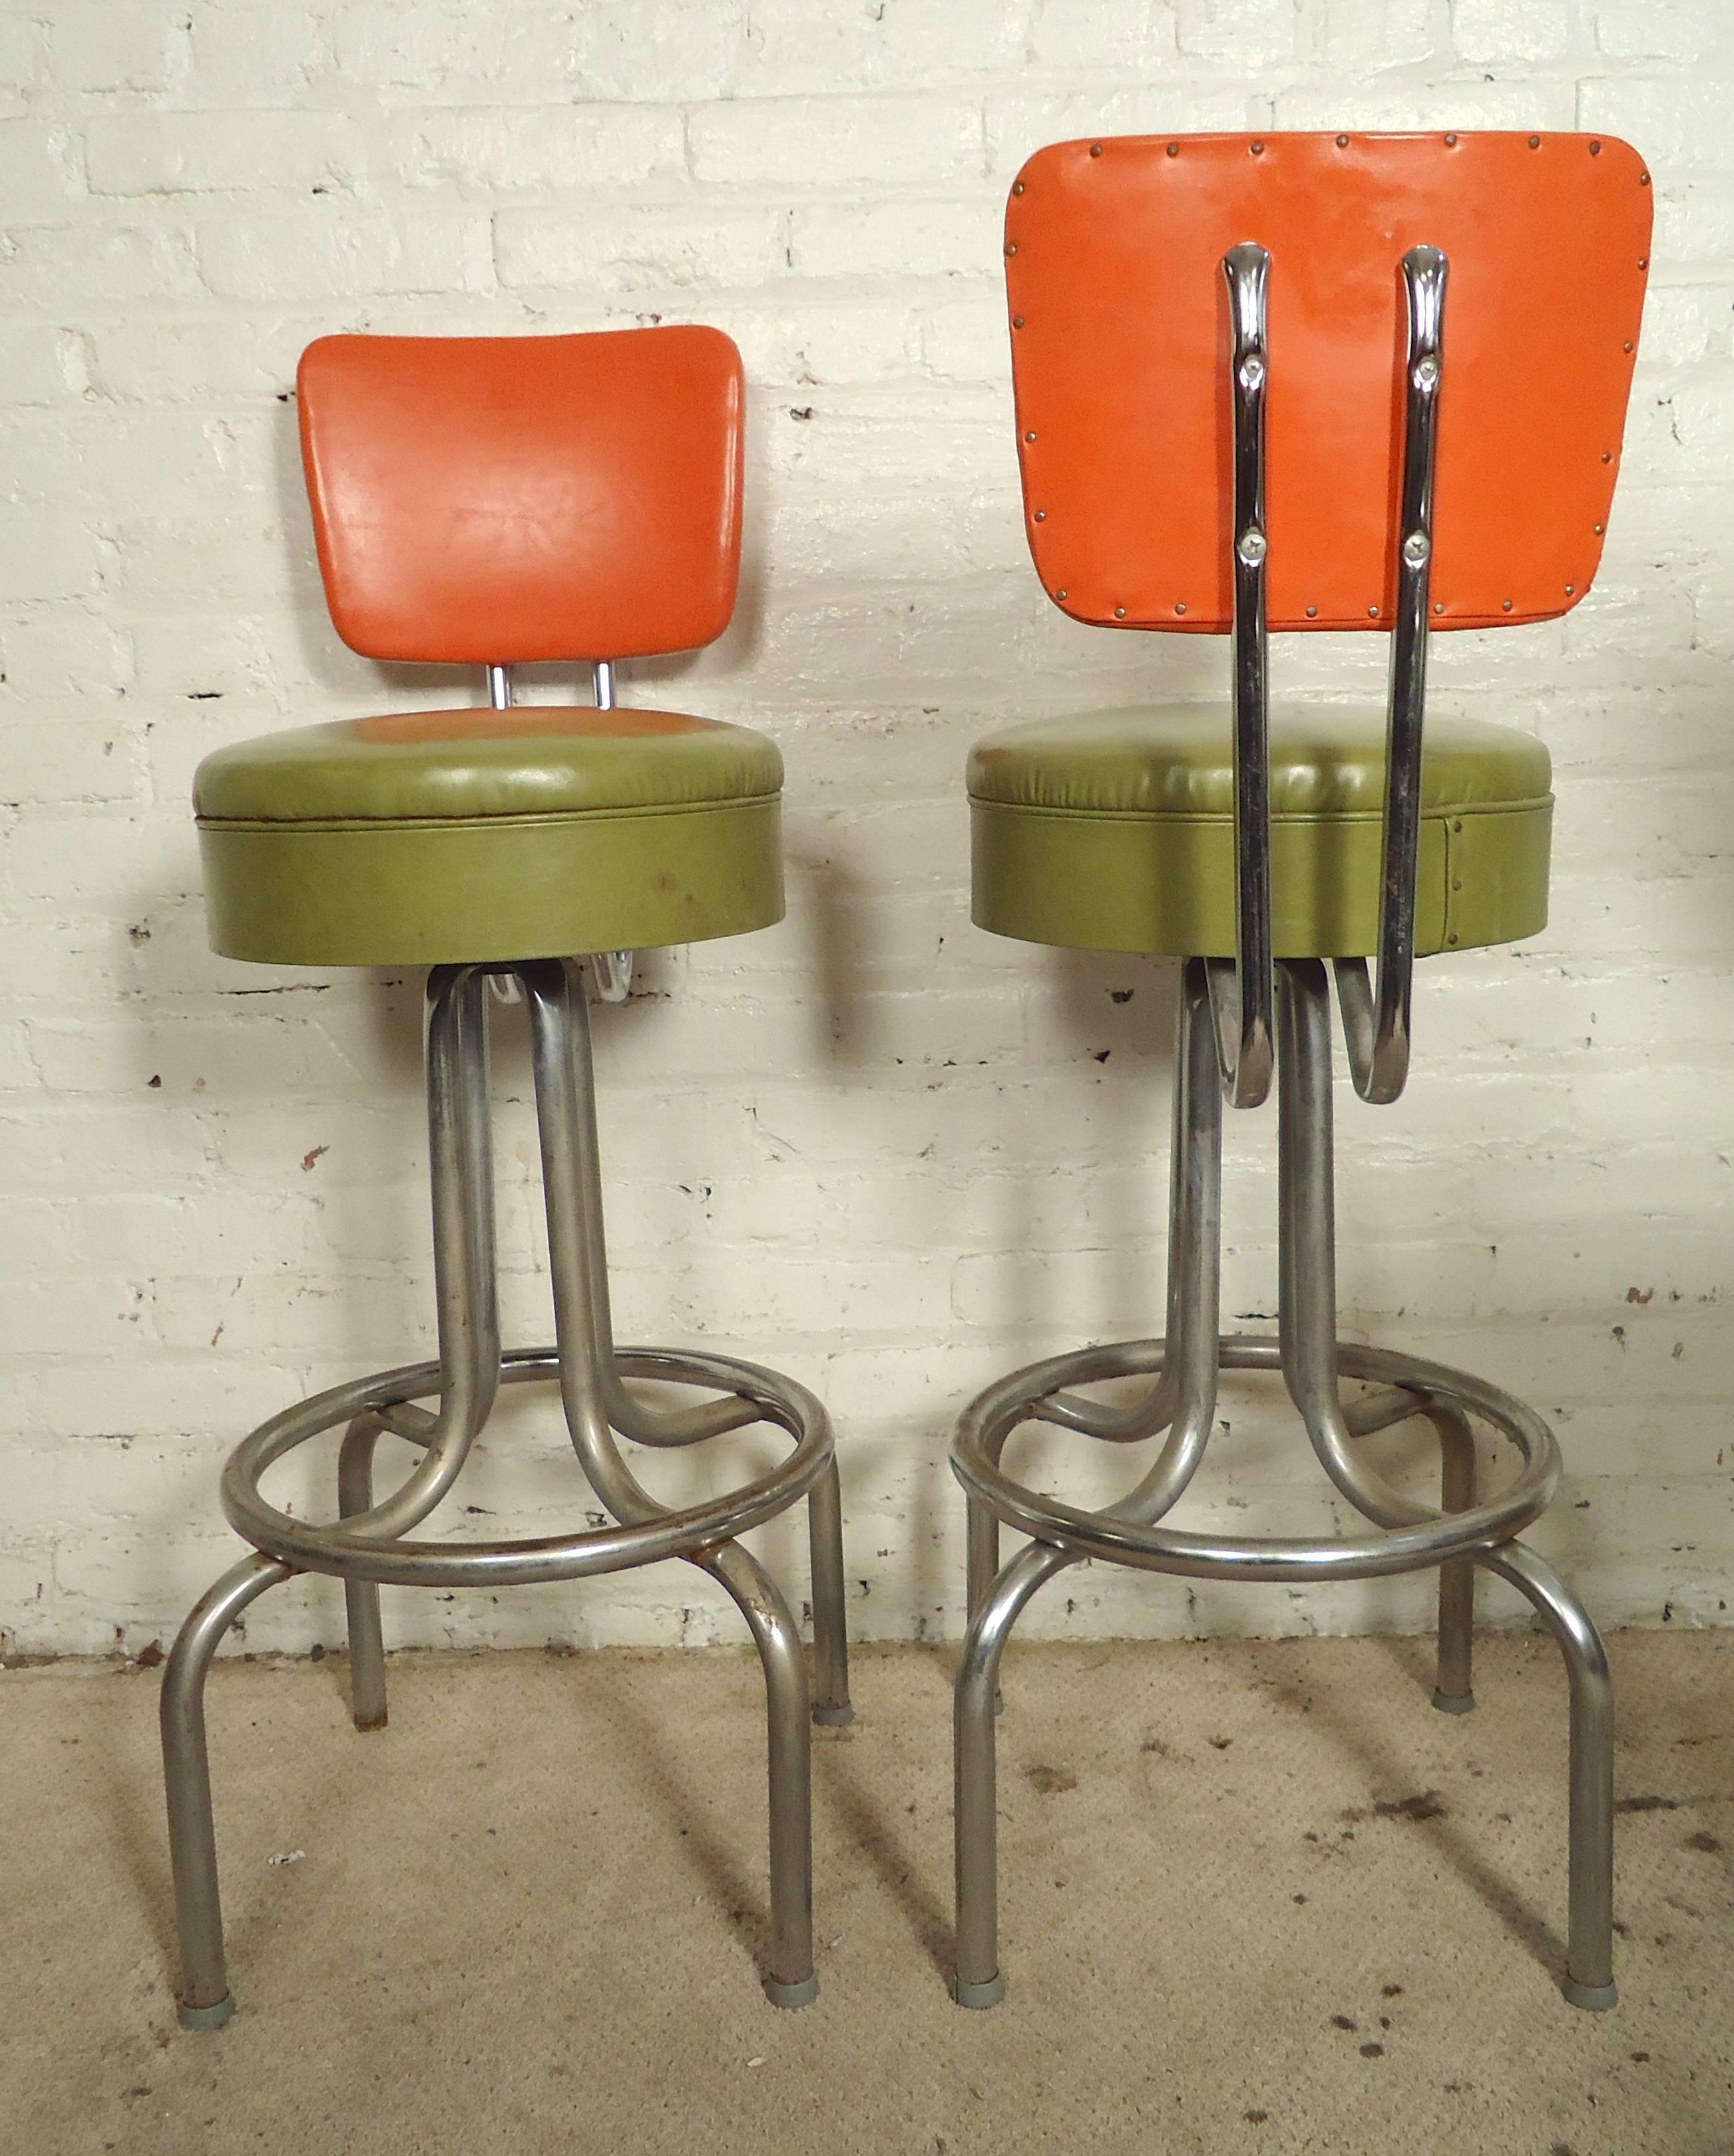 Six total bar stools in green and orange vinyl on strong chrome frames. The back is stationary but the seat swivels.
[LISTING IS FOR ONE STOOL]

 (Please confirm item location - NY or NJ - with dealer)
